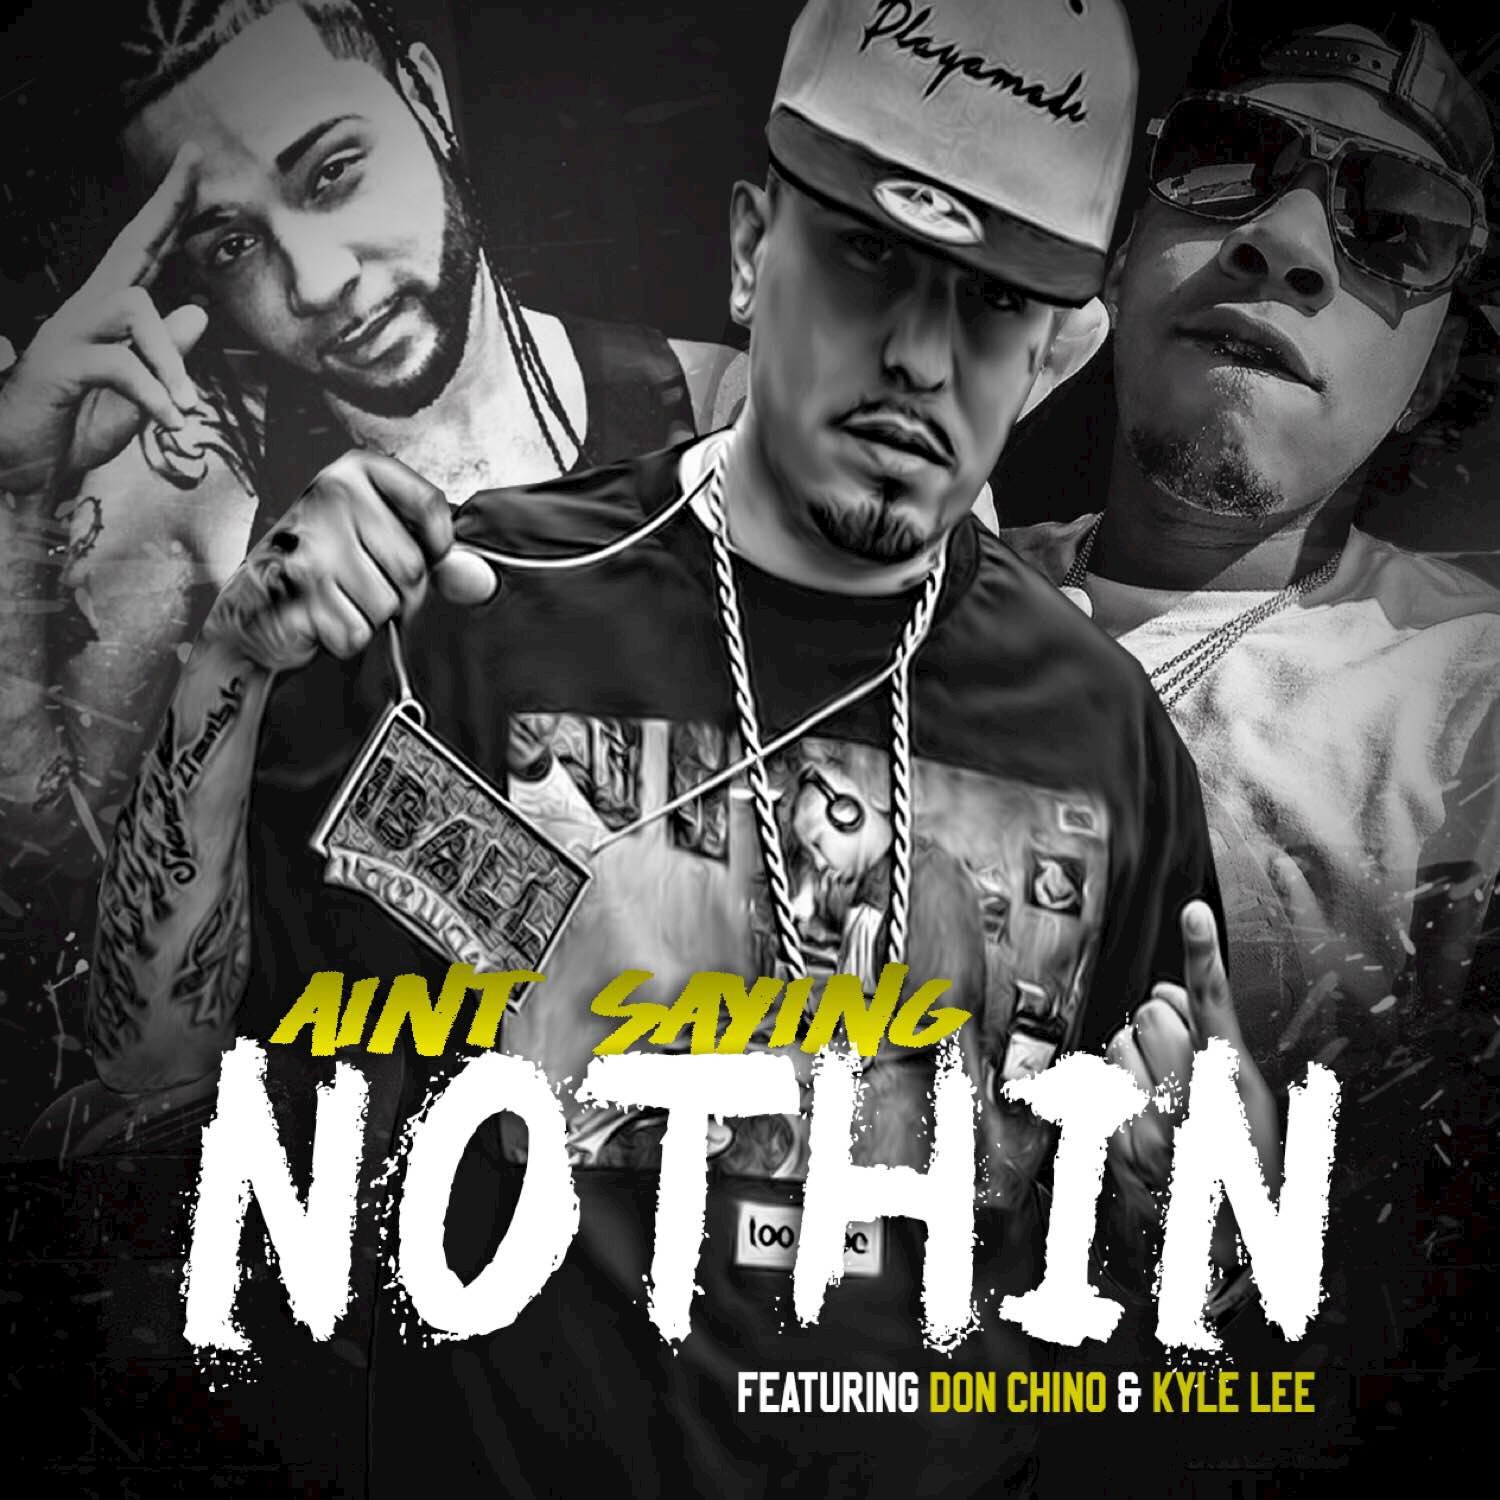 Ain't Saying Nothing (feat. Don Chino, Kyle Lee)